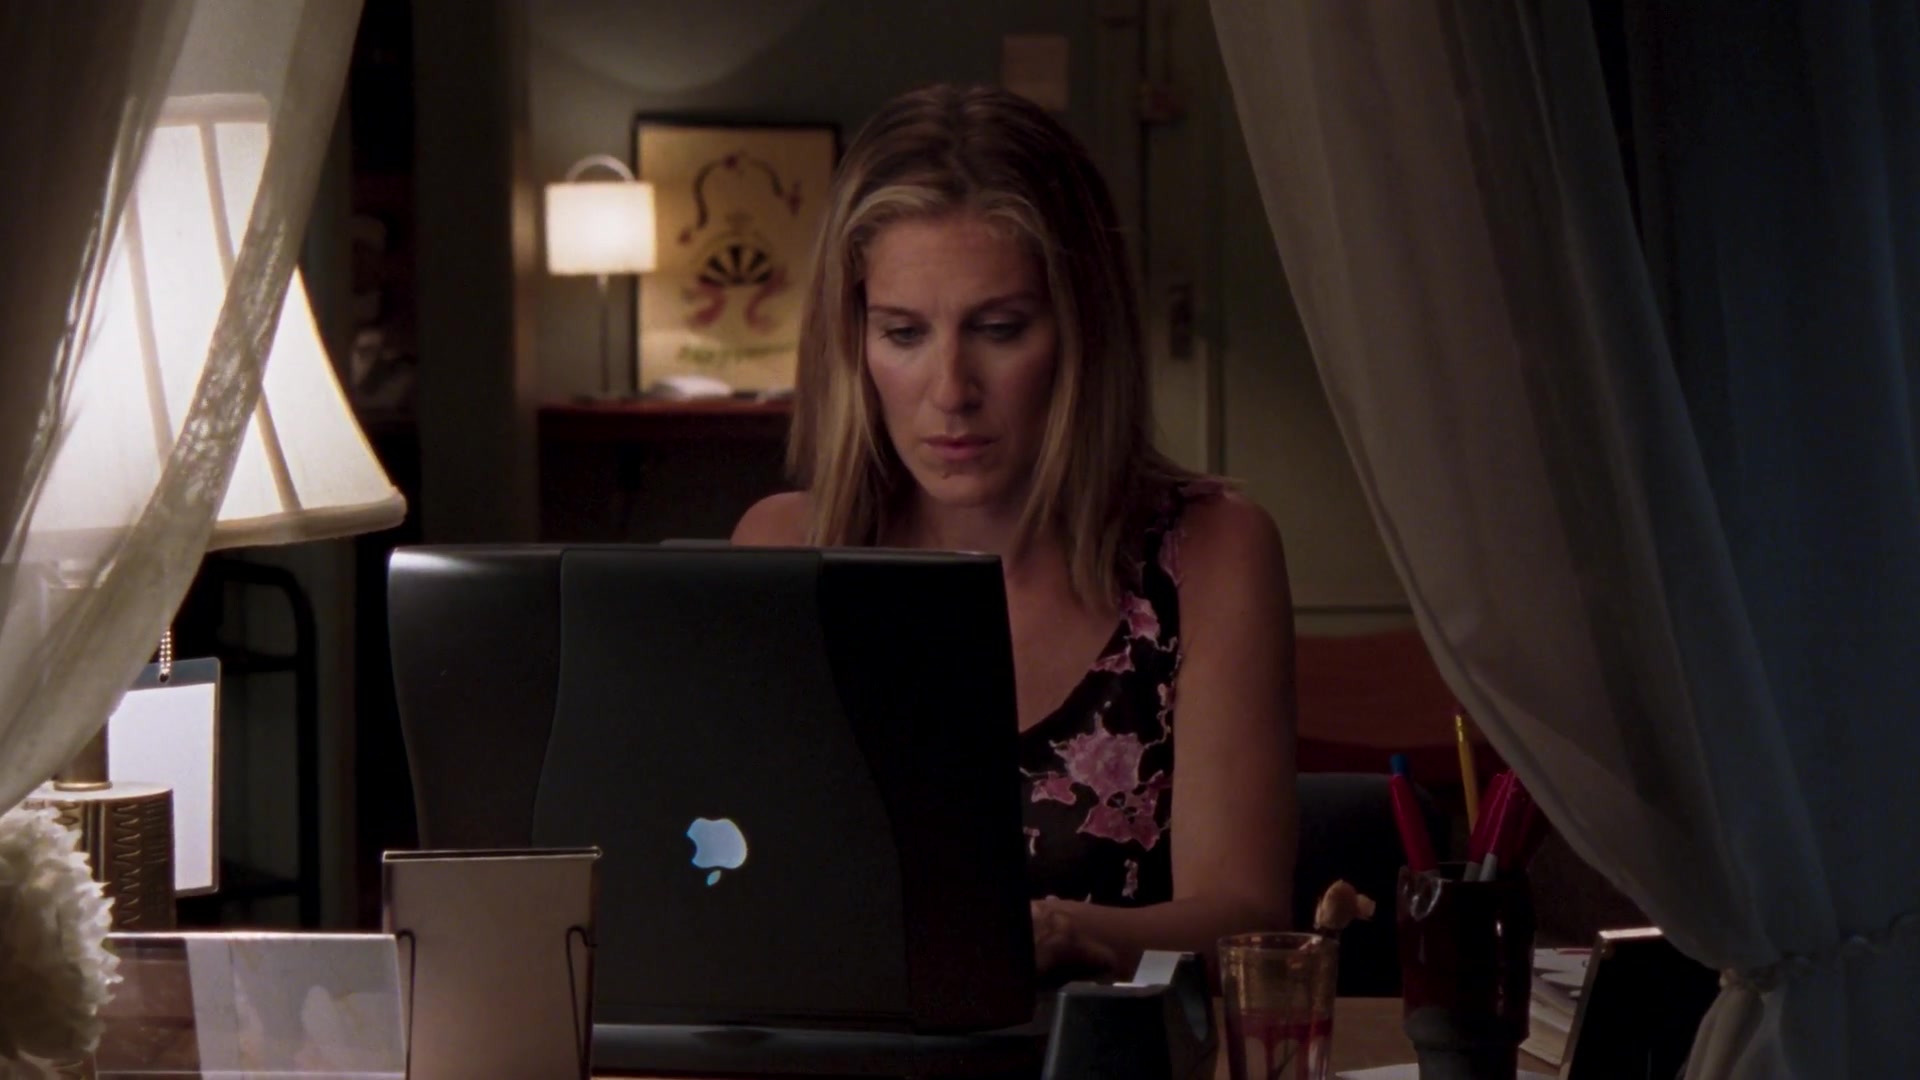 Apple Powerbook G3 Laptop Used By Actress Sarah Jessica Parker As Carrie Bradshaw In Sex And The